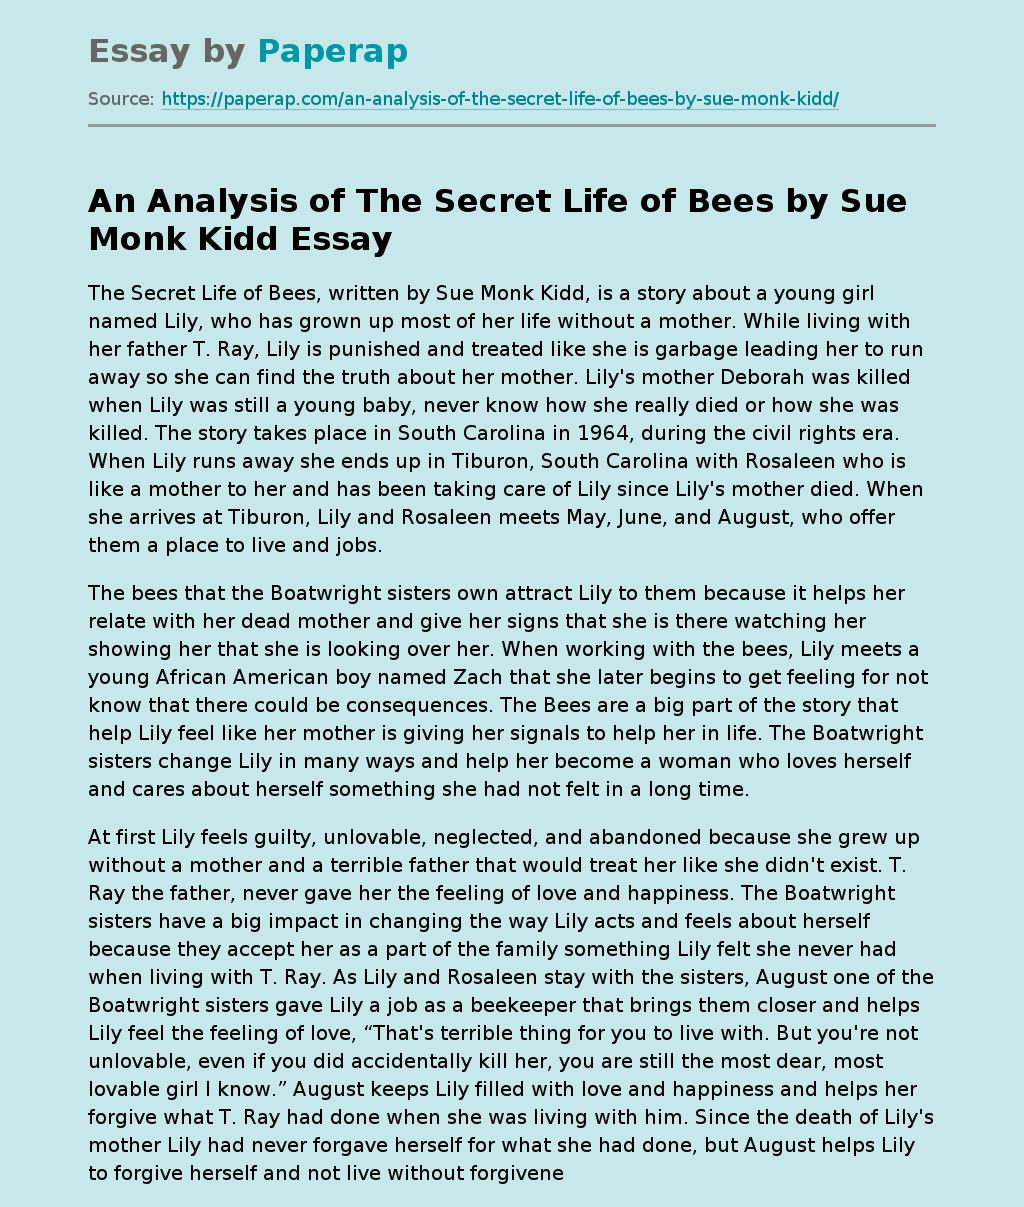 An Analysis of The Secret Life of Bees by Sue Monk Kidd